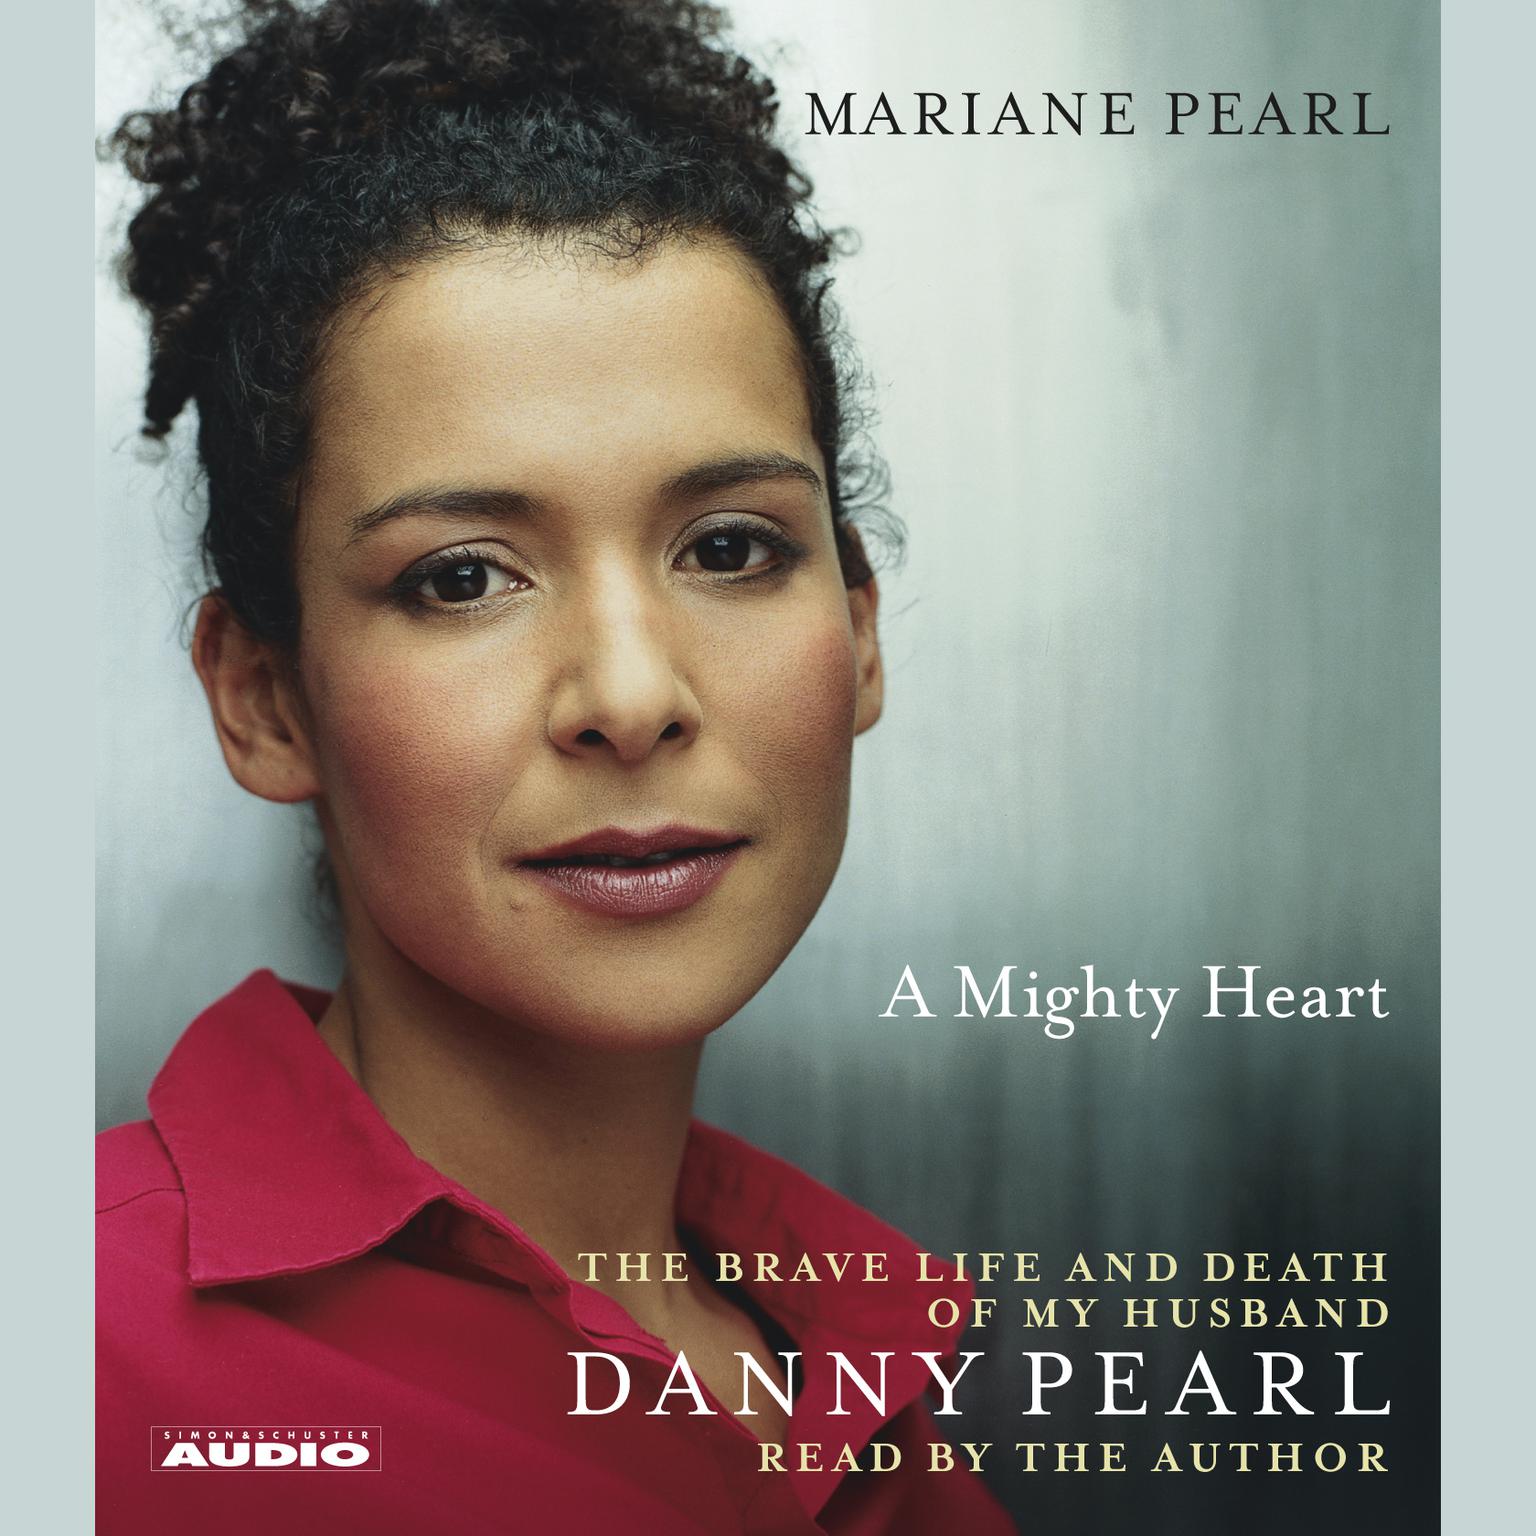 A Mighty Heart (Abridged): The Brave Life and Death of My Husband Danny Pearl Audiobook, by Mariane Pearl